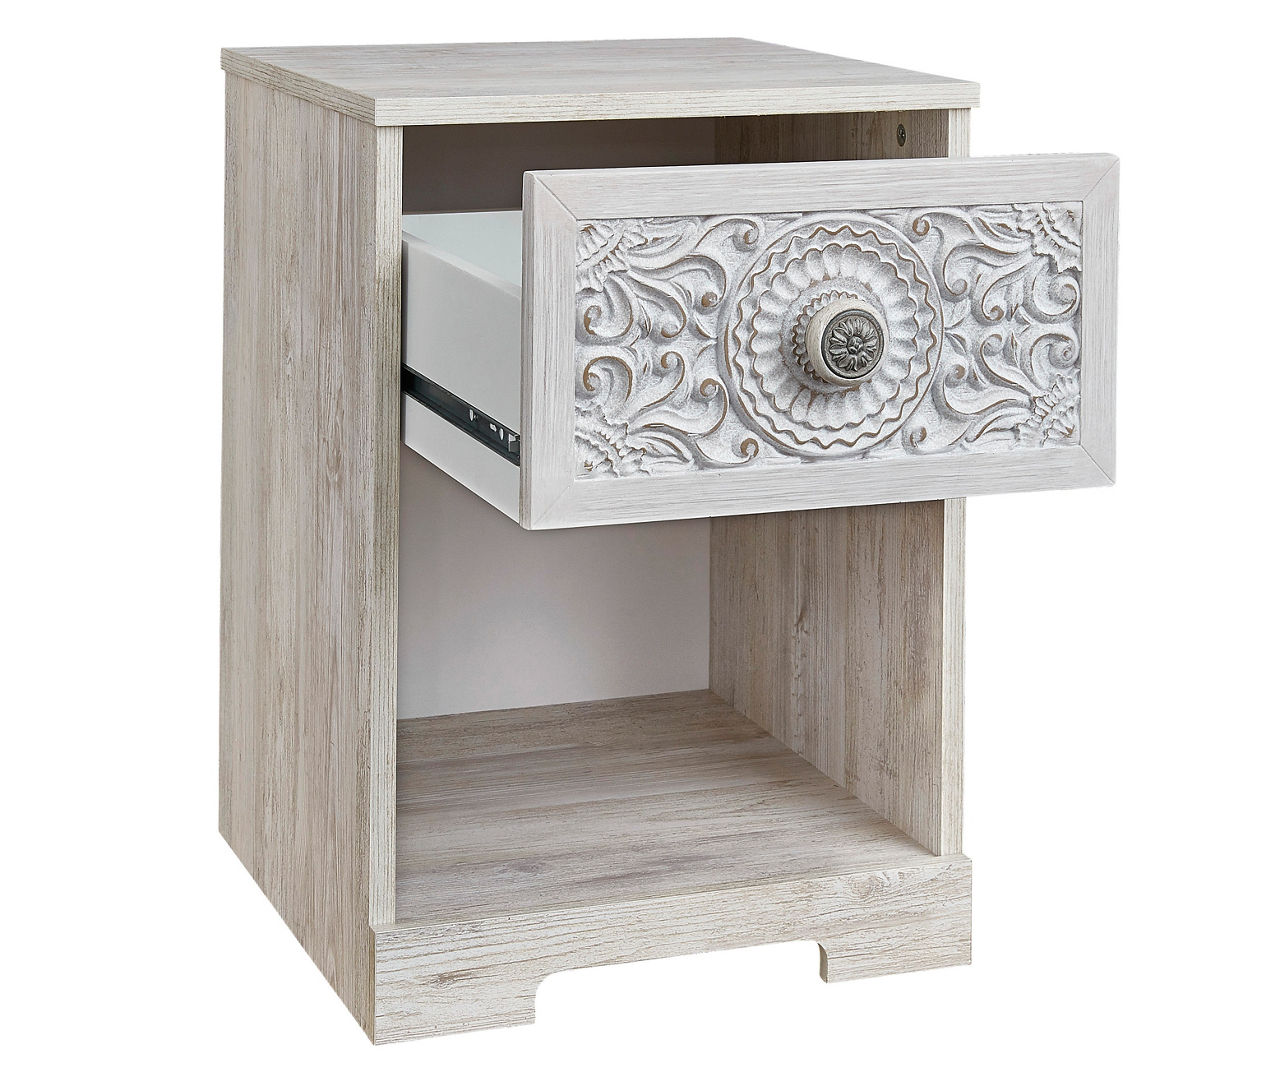 Signature Design By Ashley Paxberry Whitewash Nightstand | Big Lots